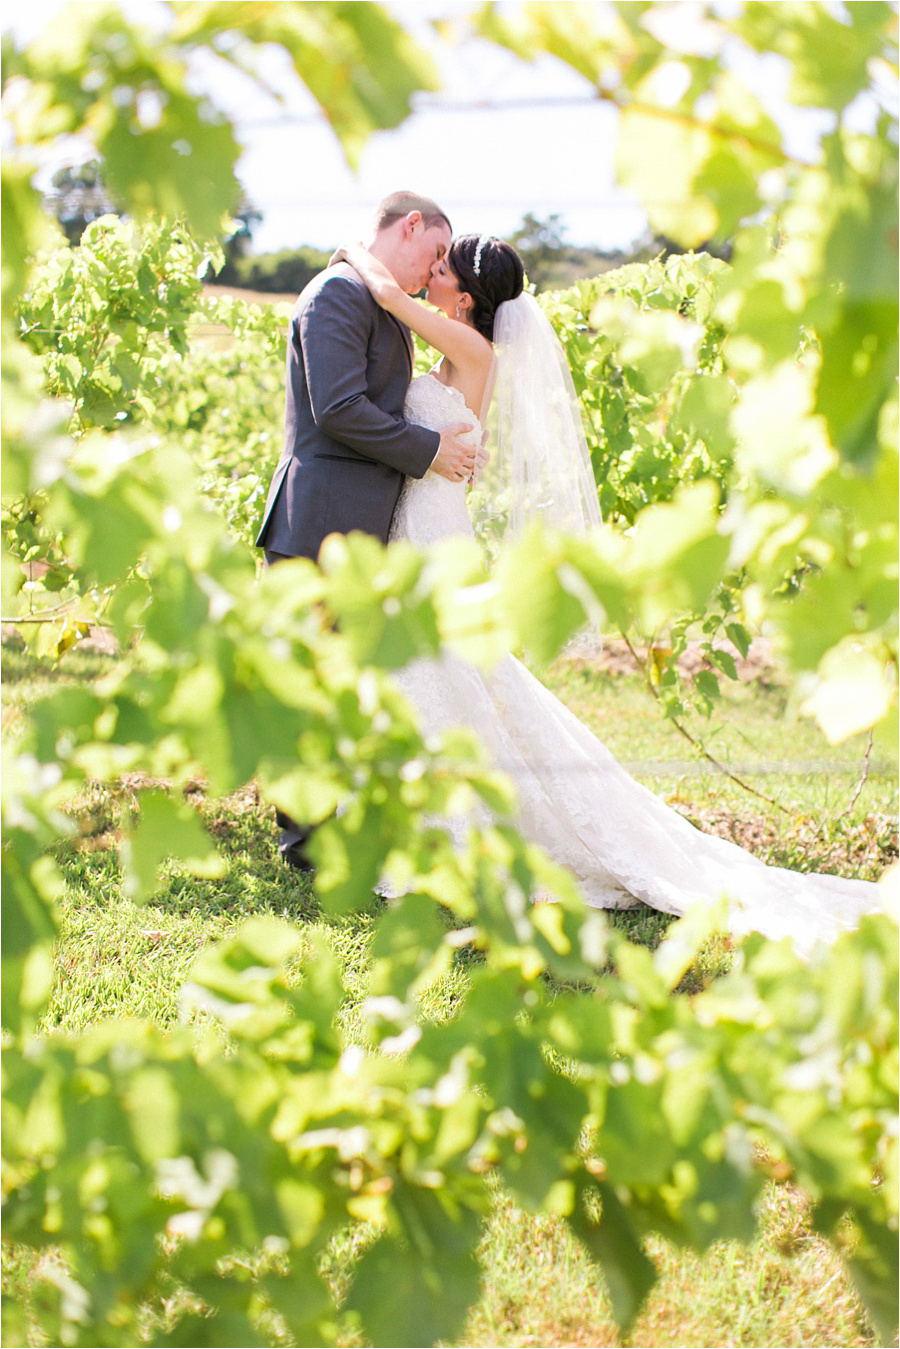 Red Maple Vineyard Wedding Photos - Amy Rizzuto Photography-22